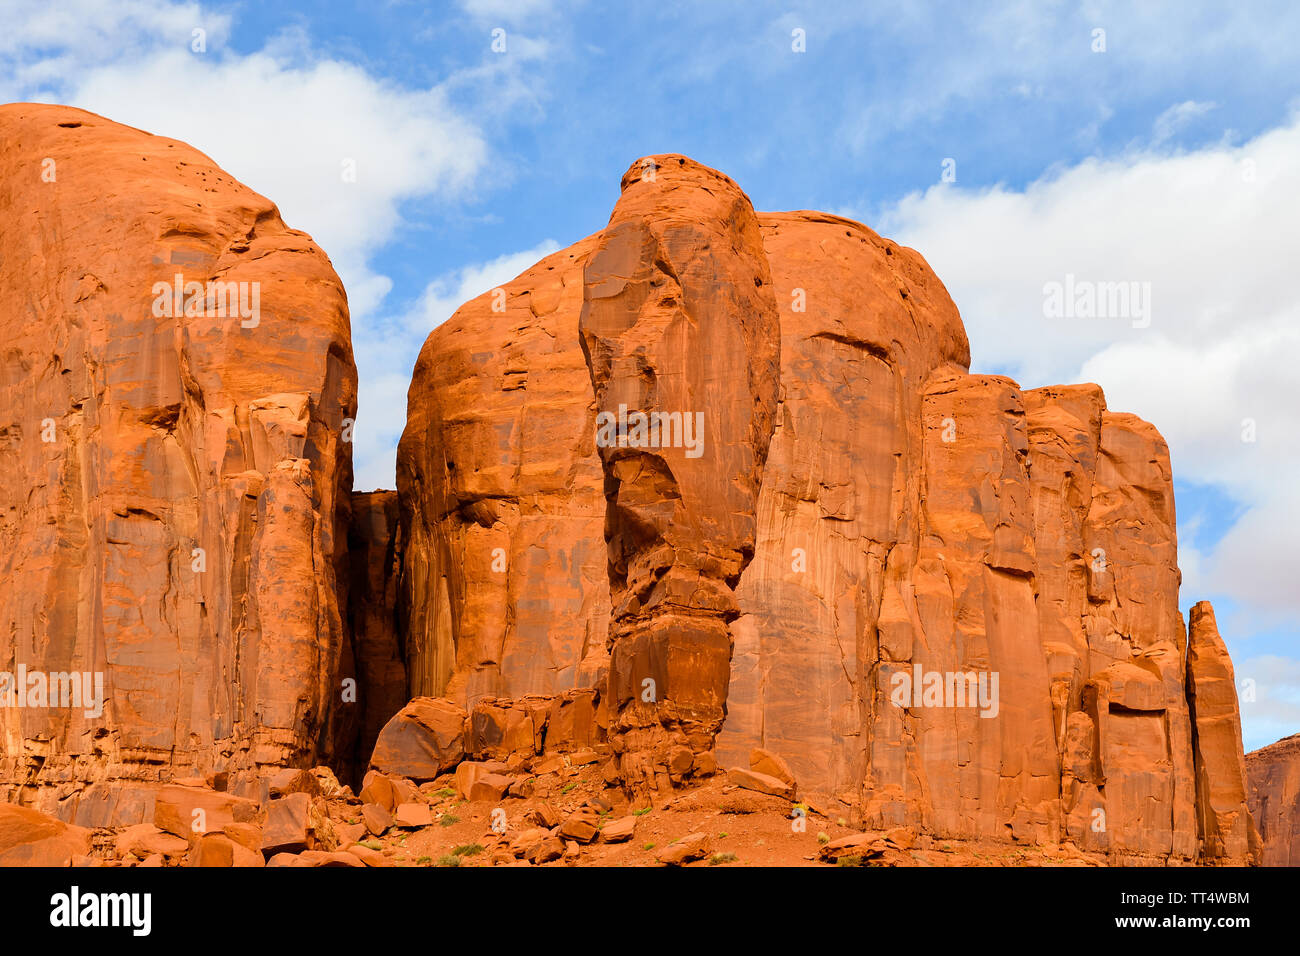 Cly Butte, Monument Valley, Navajo Tribal Park - Arizona Stock Photo